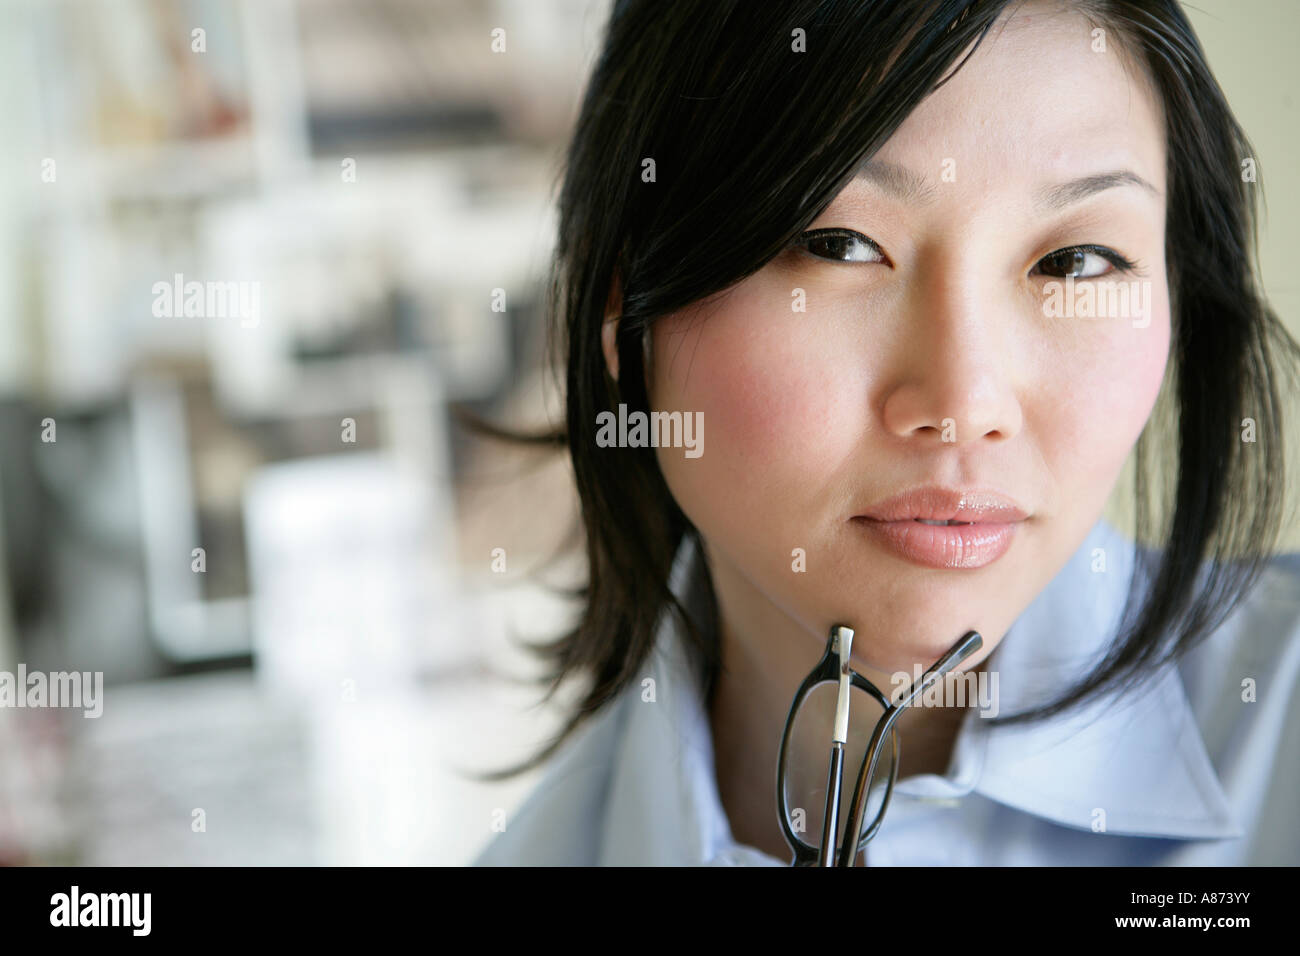 Young woman, close-up Stock Photo